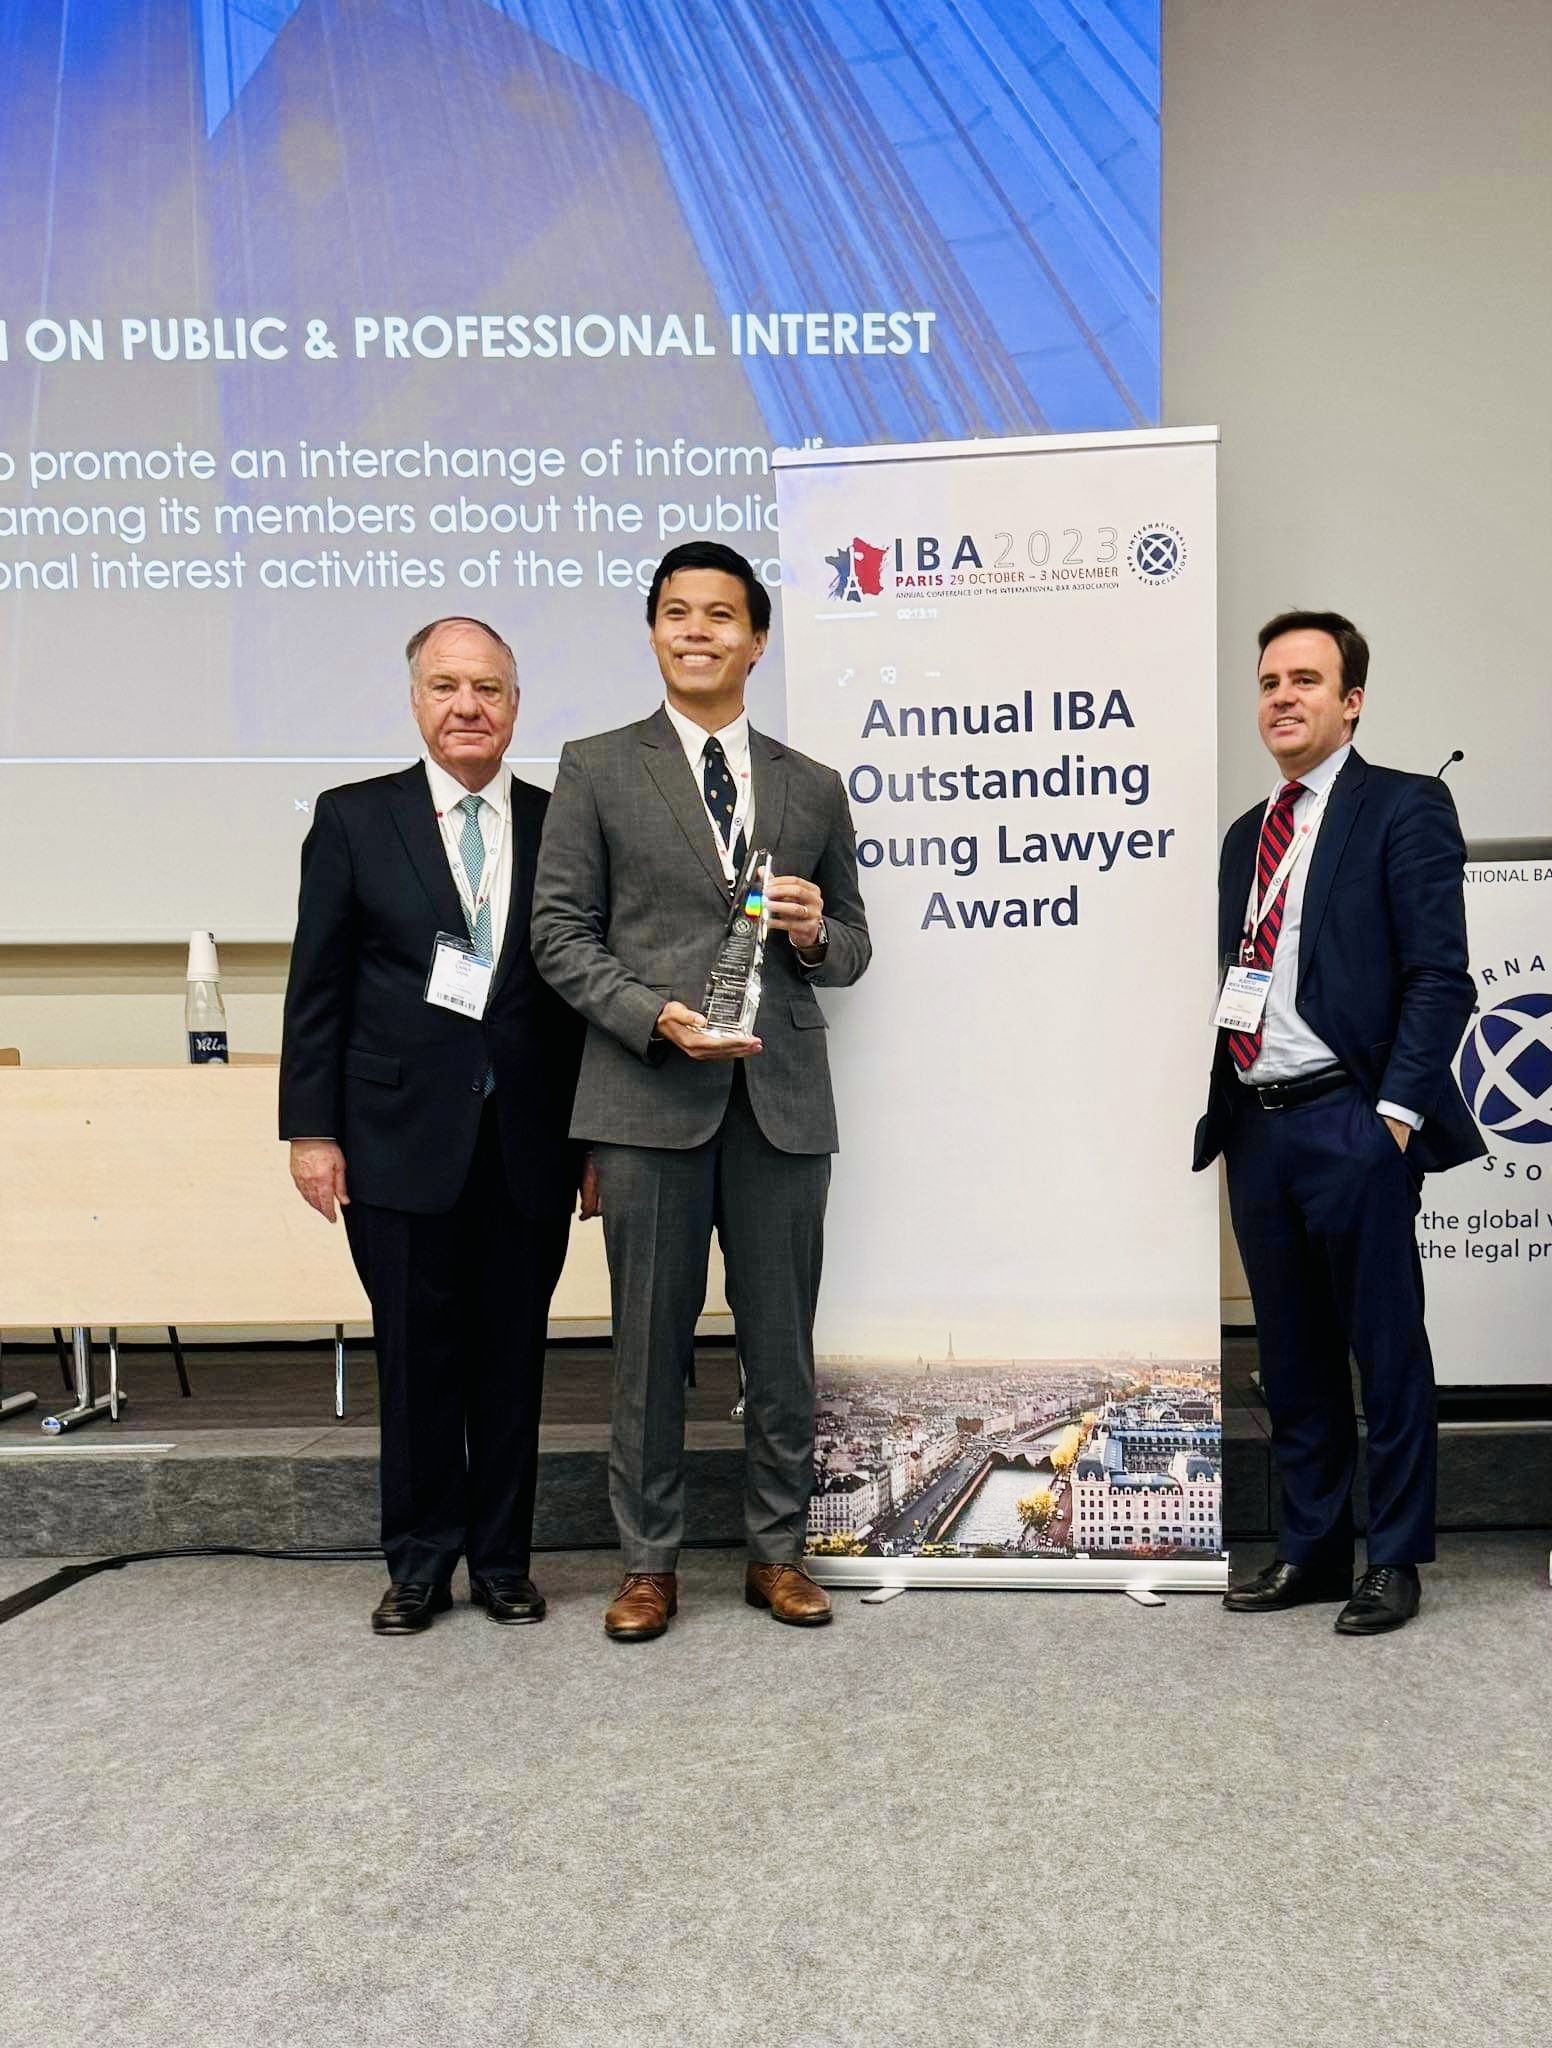 Raphael Pangalangan receives his award. He stands by two colleagues in front of a roller banner which says "Annual IBA Outstanding Young Lawyer Award"